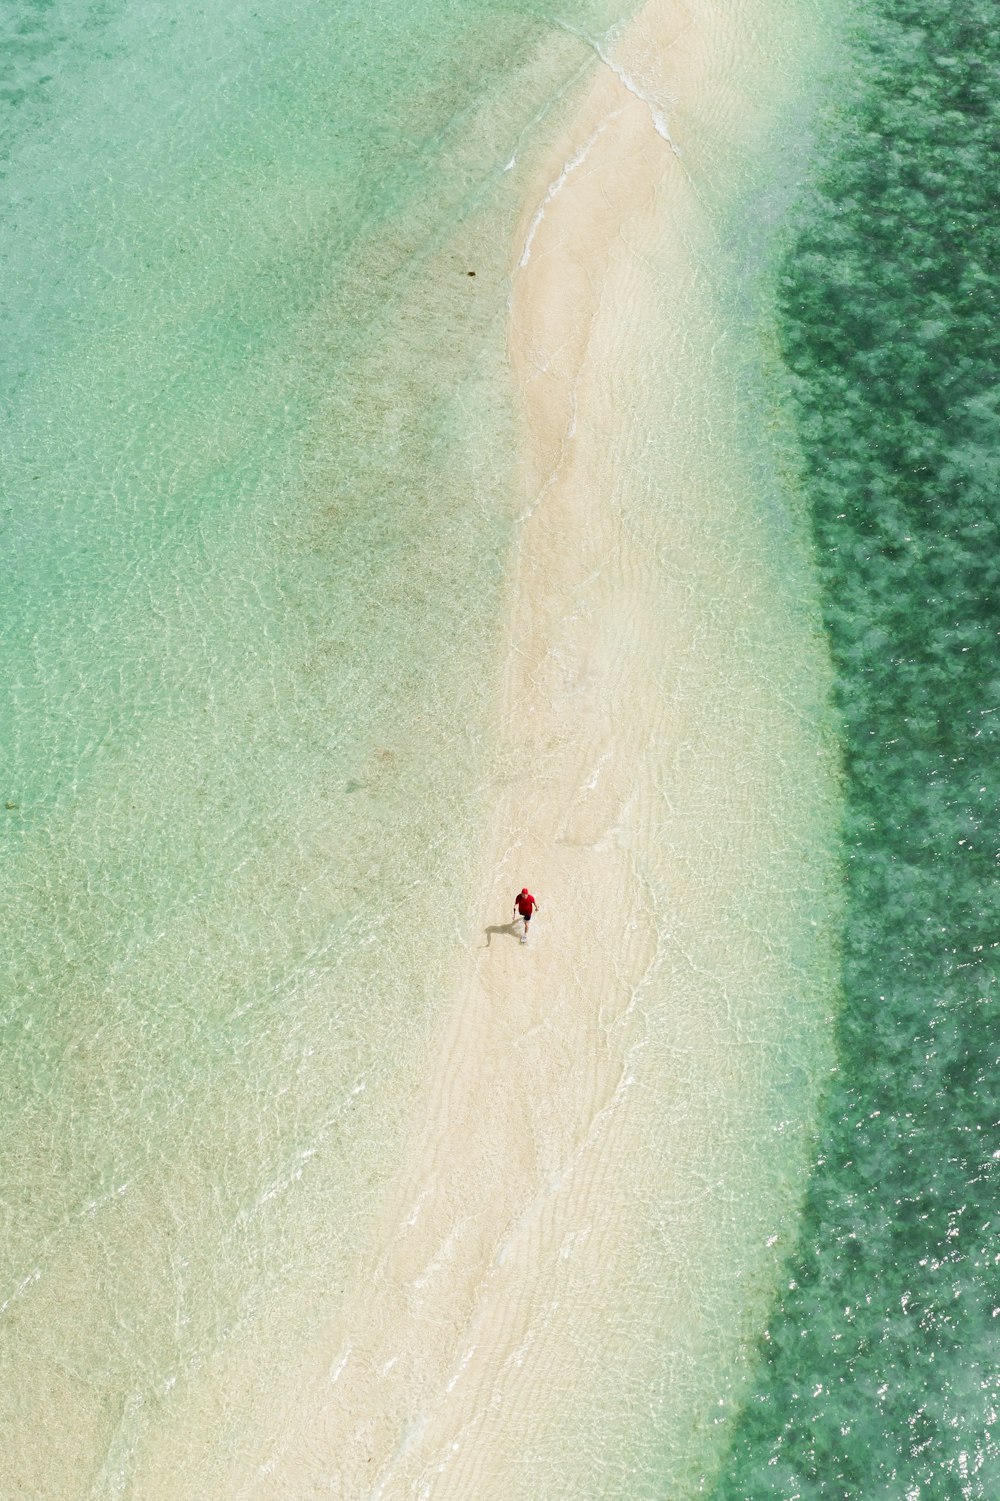 aerial view of person surfing on sea during daytime